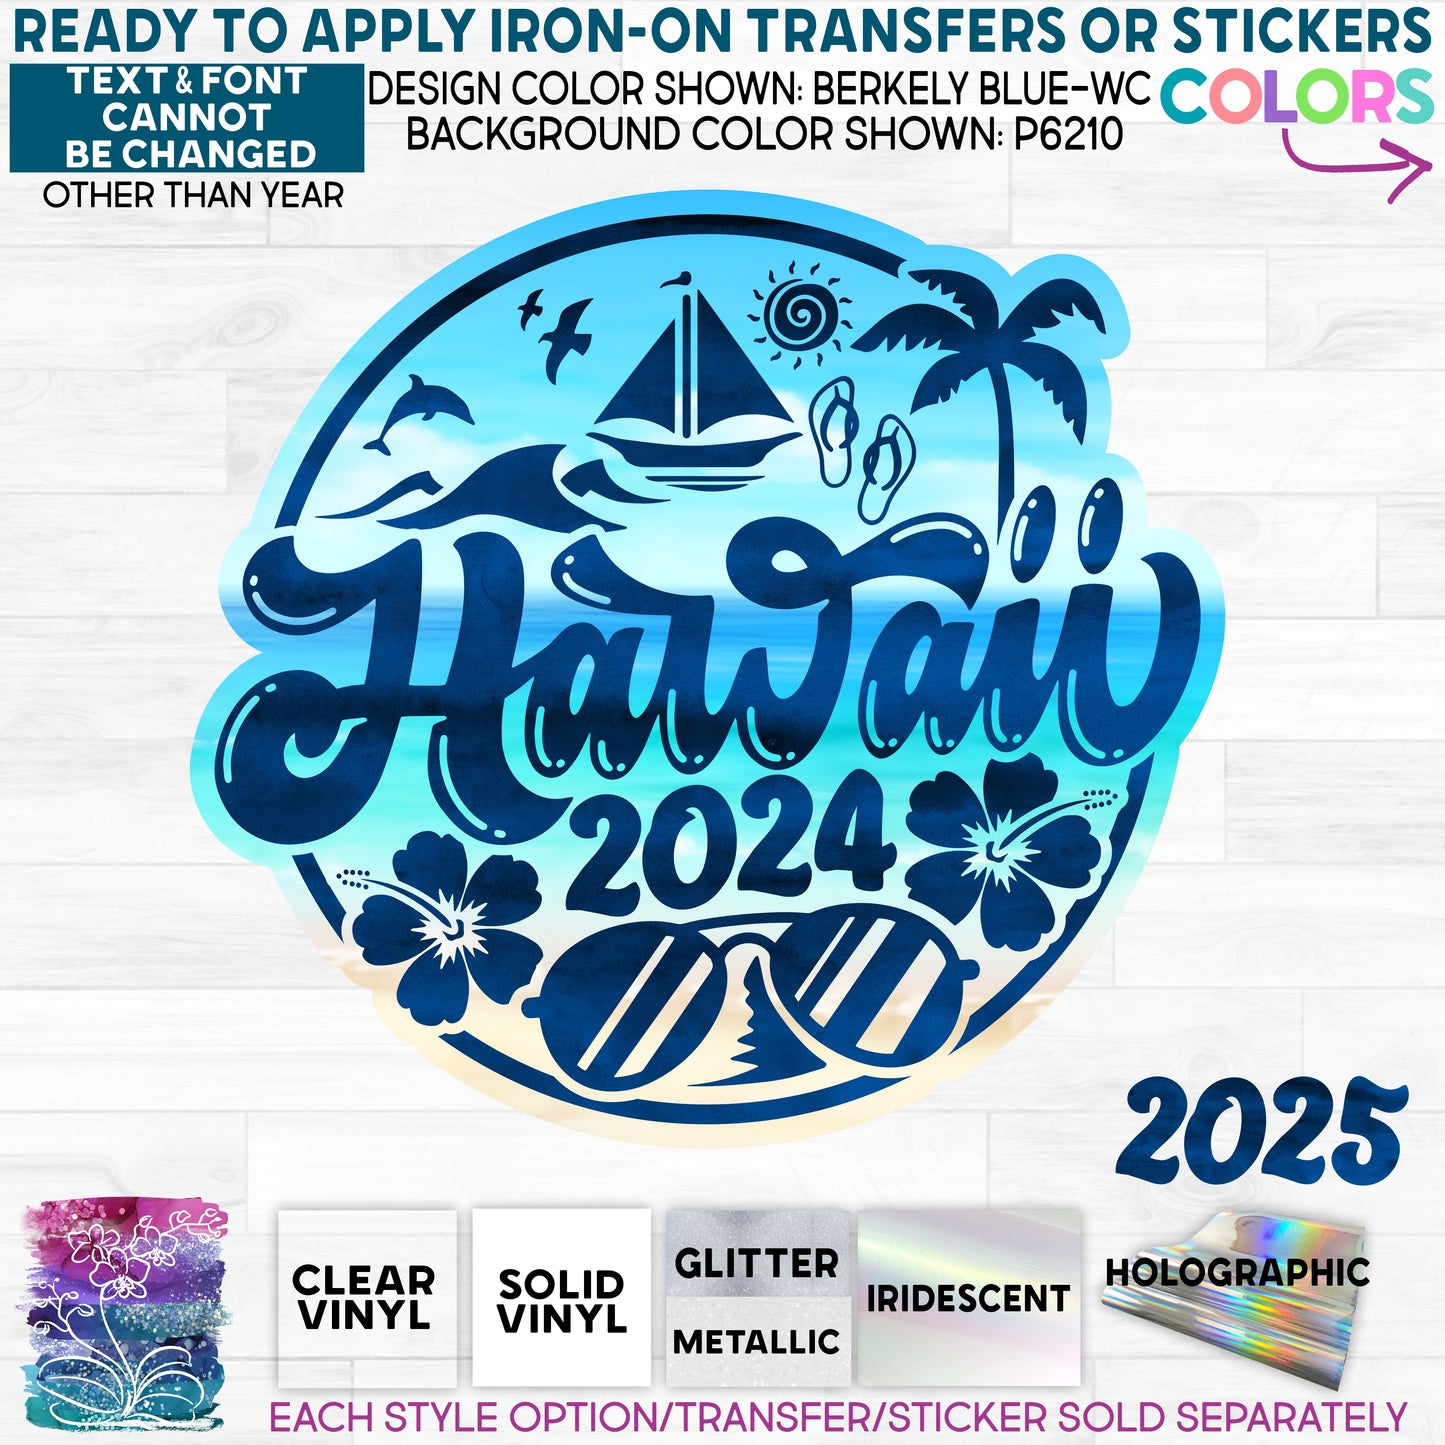 (s329-N3) Hawaii 2024 Any Year Glitter or Vinyl Iron-On Transfer or Sticker